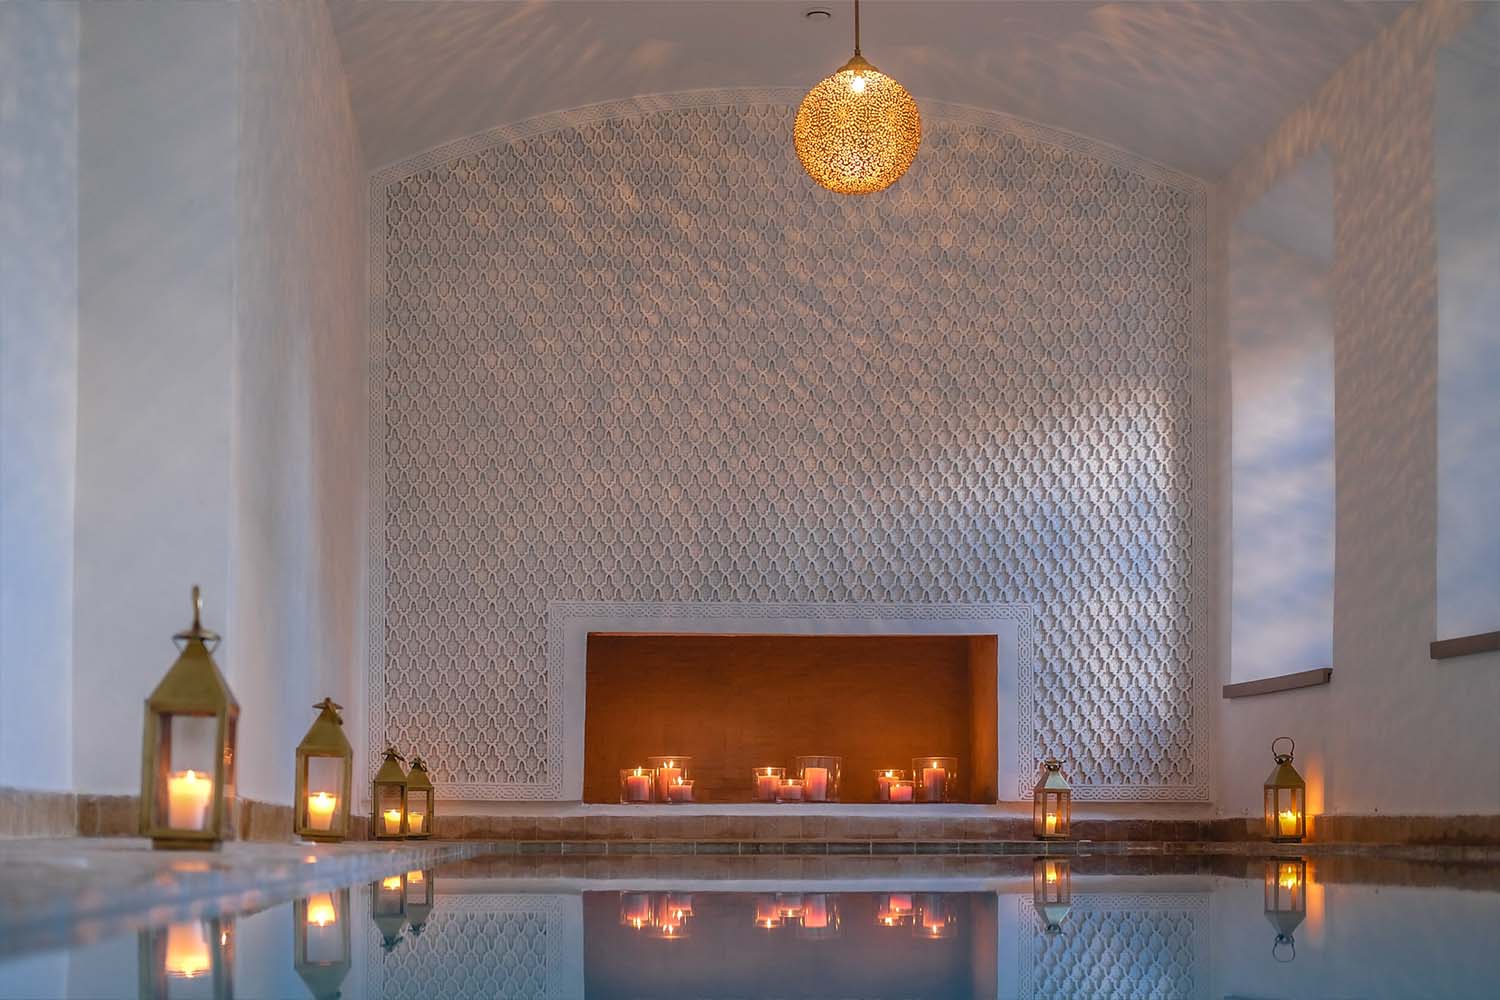 Get pampered with a private hammam at day spa Les Bains de Marrakech